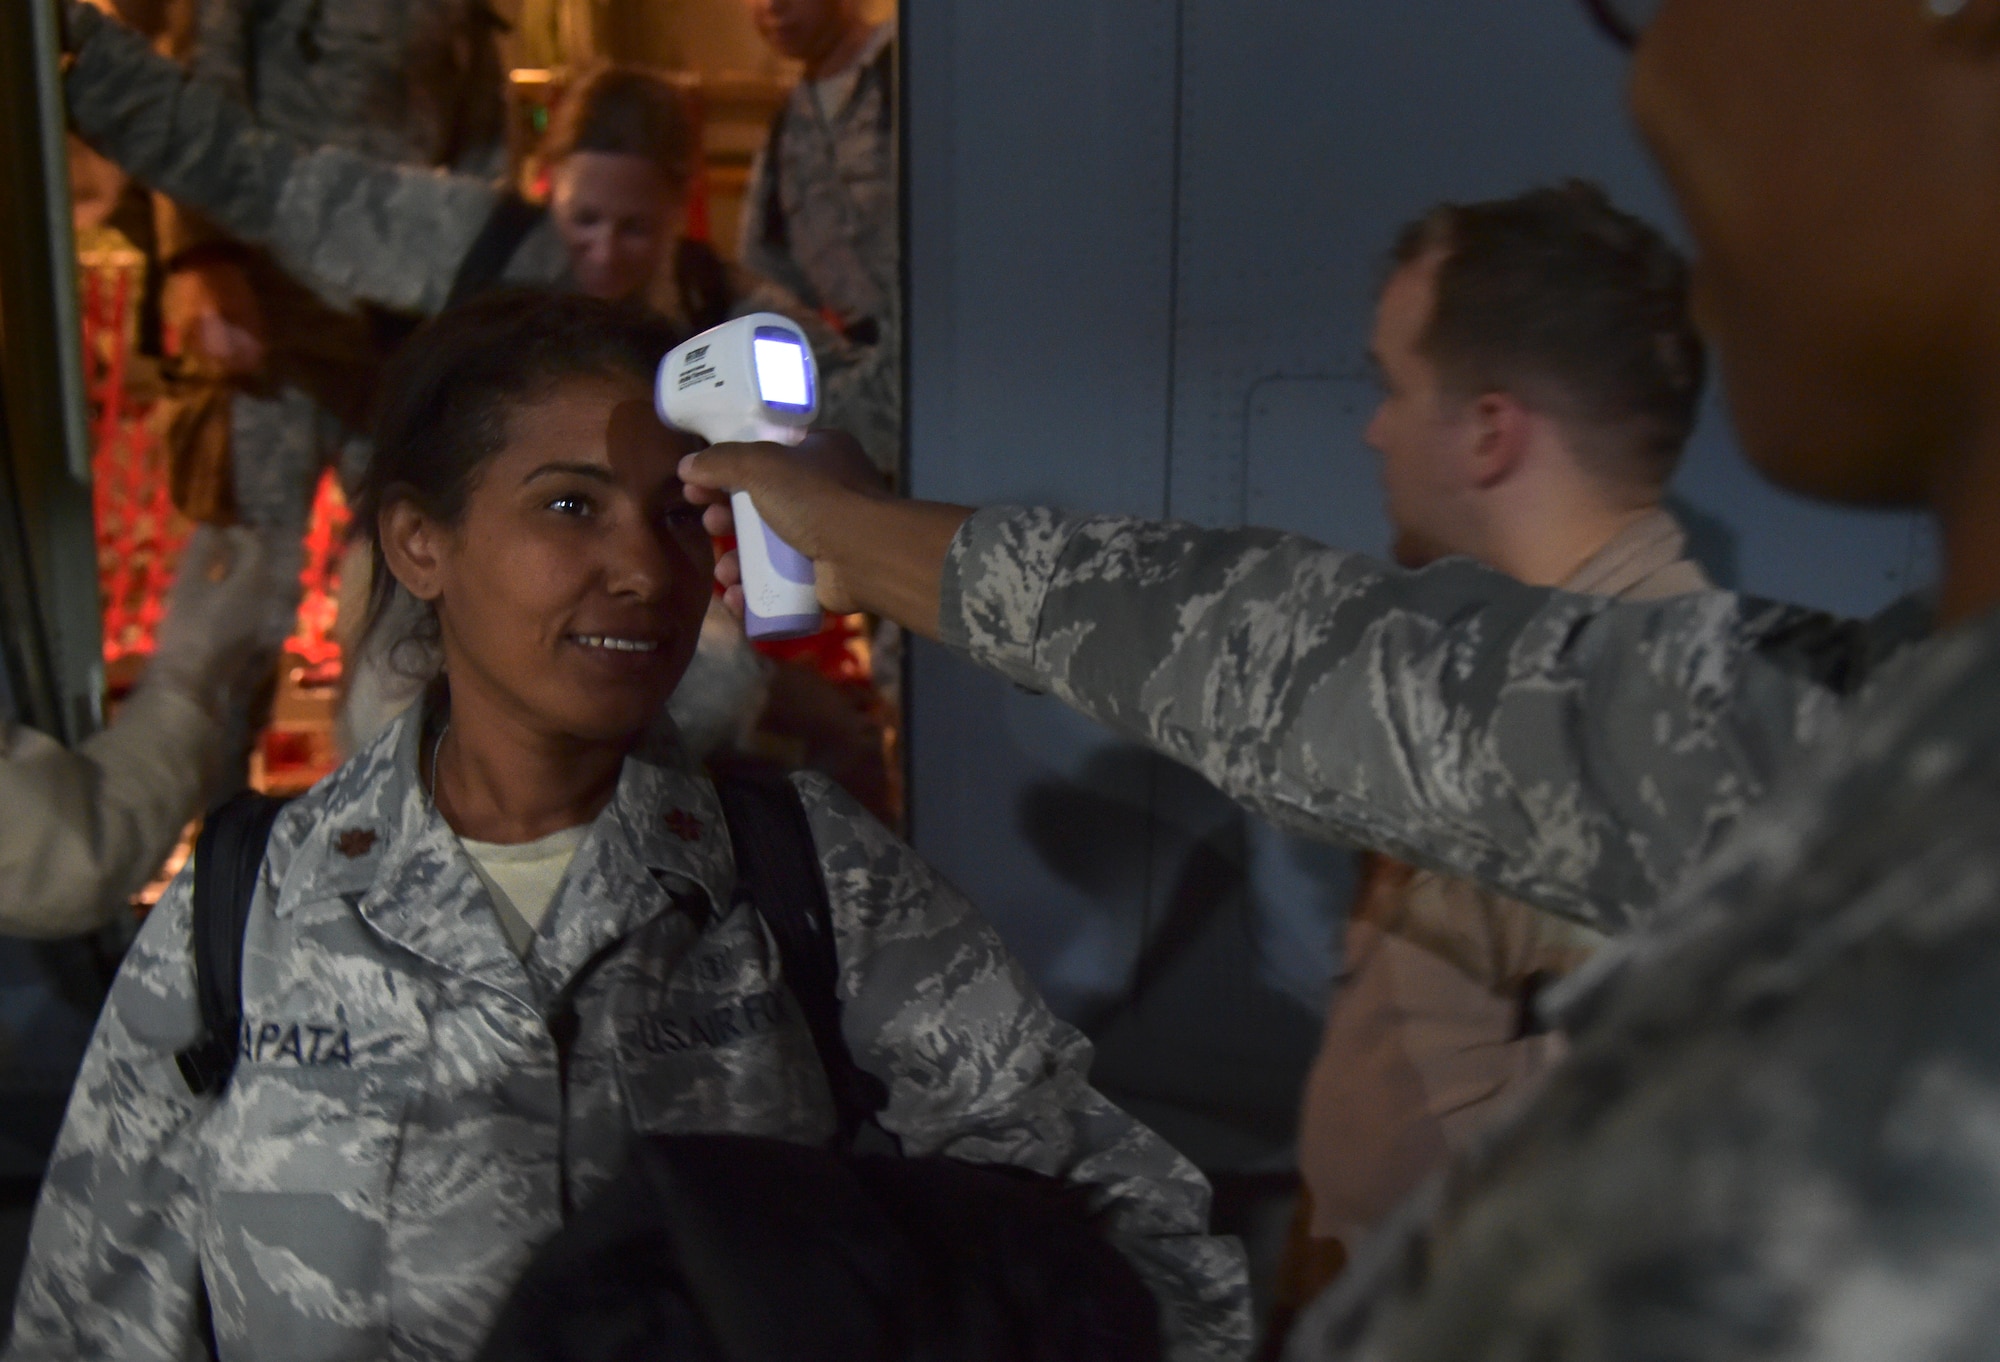 Maj. Mayra Zapata, 633rd Medical Operations Squadron, gets her temperature taken by Tech. Sgt. Saquadrea Crosby, 86th Aerospace Medicine Squadron public health NCOIC, as she deplanes a C-130J Super Hercules at Ramstein Air Base, Germany, Oct. 19, 2014. Any personnel traveling into Ramstein from Ebola infected areas will be medically screened upon their arrival and cleared by public health for onward travel to ensure the health and safety of all passengers, aircrew and members of the Kaiserslautern community. (U.S. Air Force photo/Staff Sgt. Sara Keller)